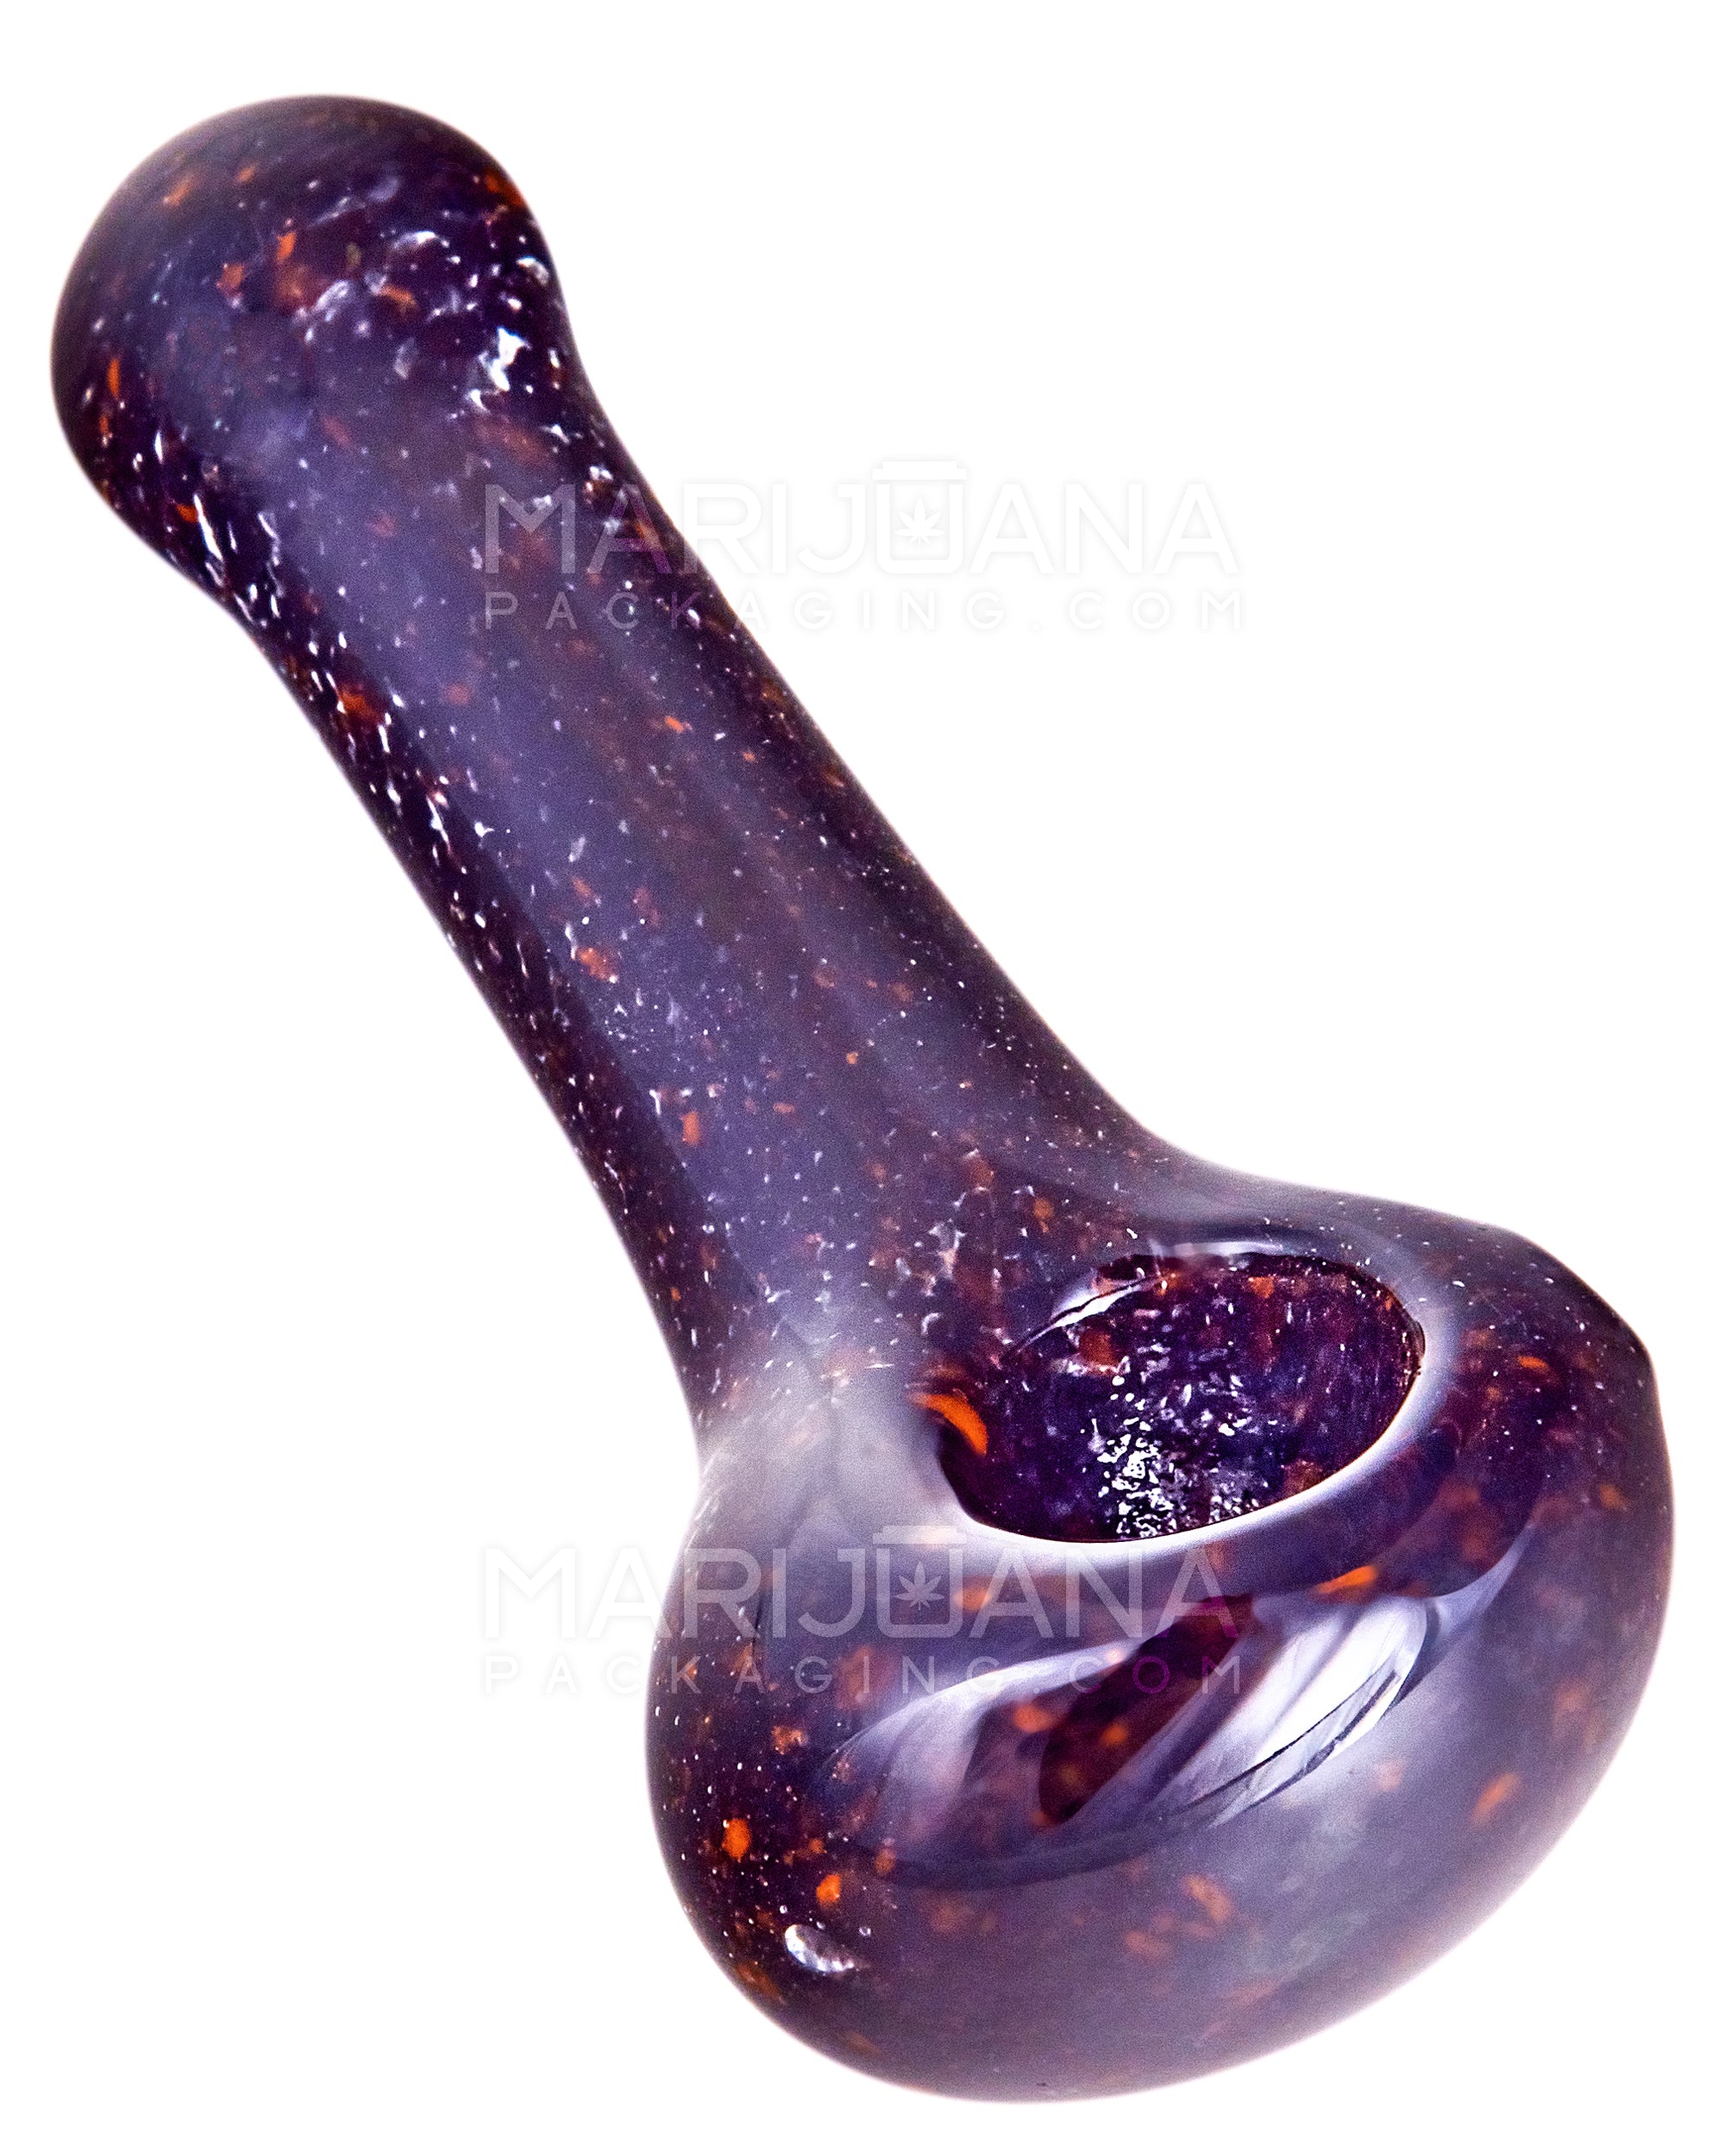 Best Hand Pipes for Smoking Weed: Our Top Picks of 2022